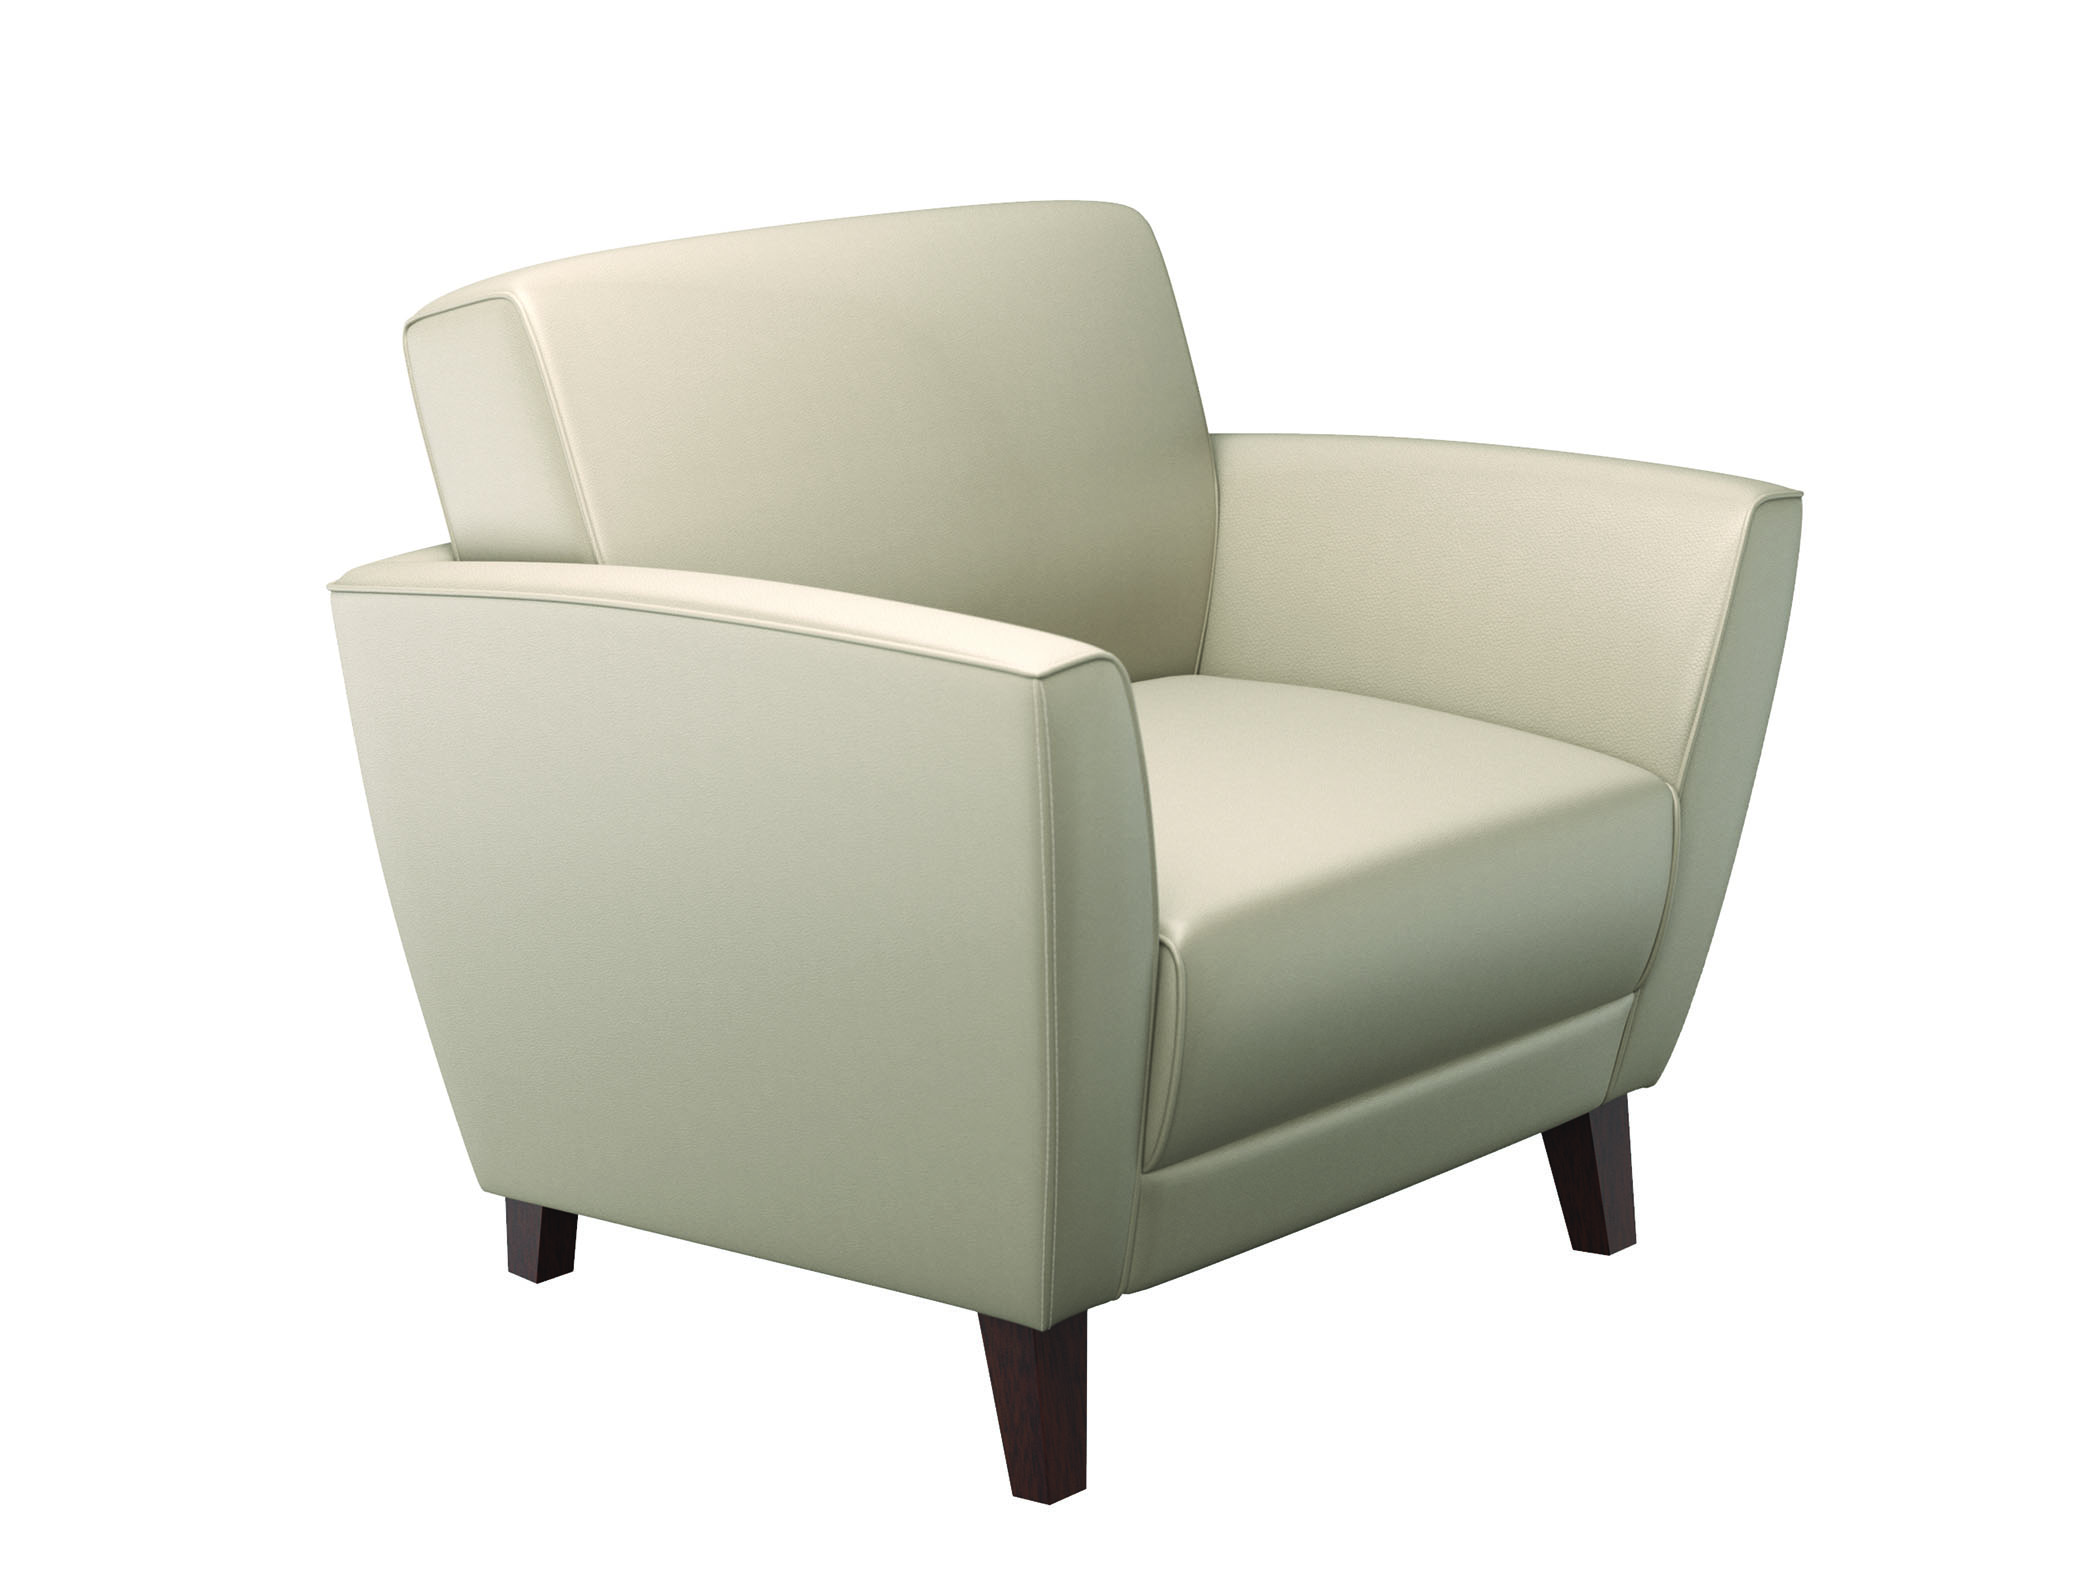 Reception Area Furniture from Compel - Levengo guest chair